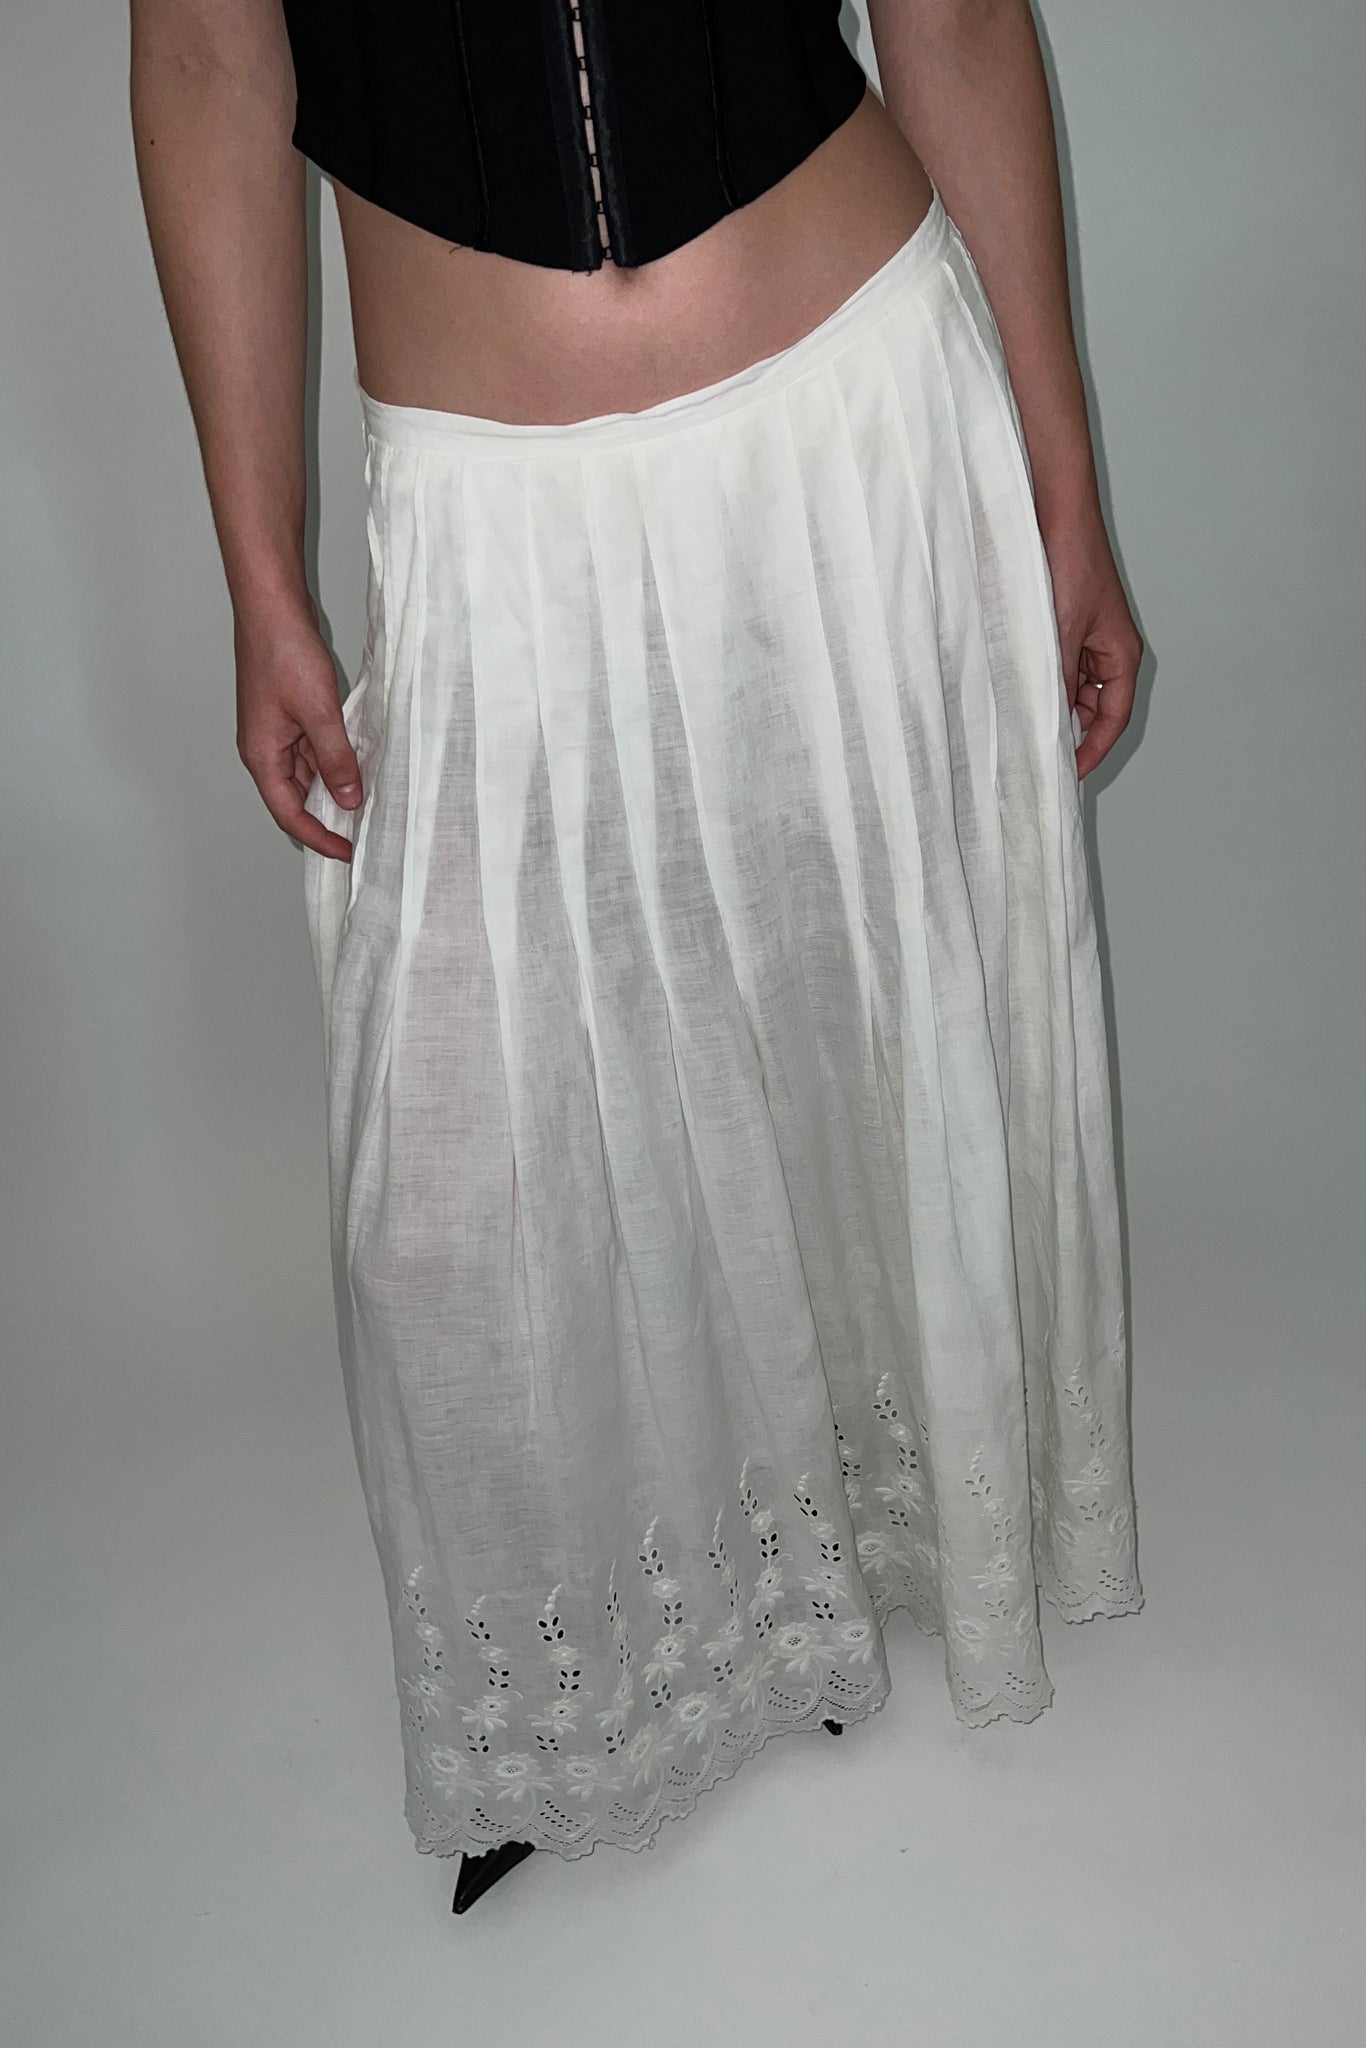 White Antique Embroidered Petticoat Skirt